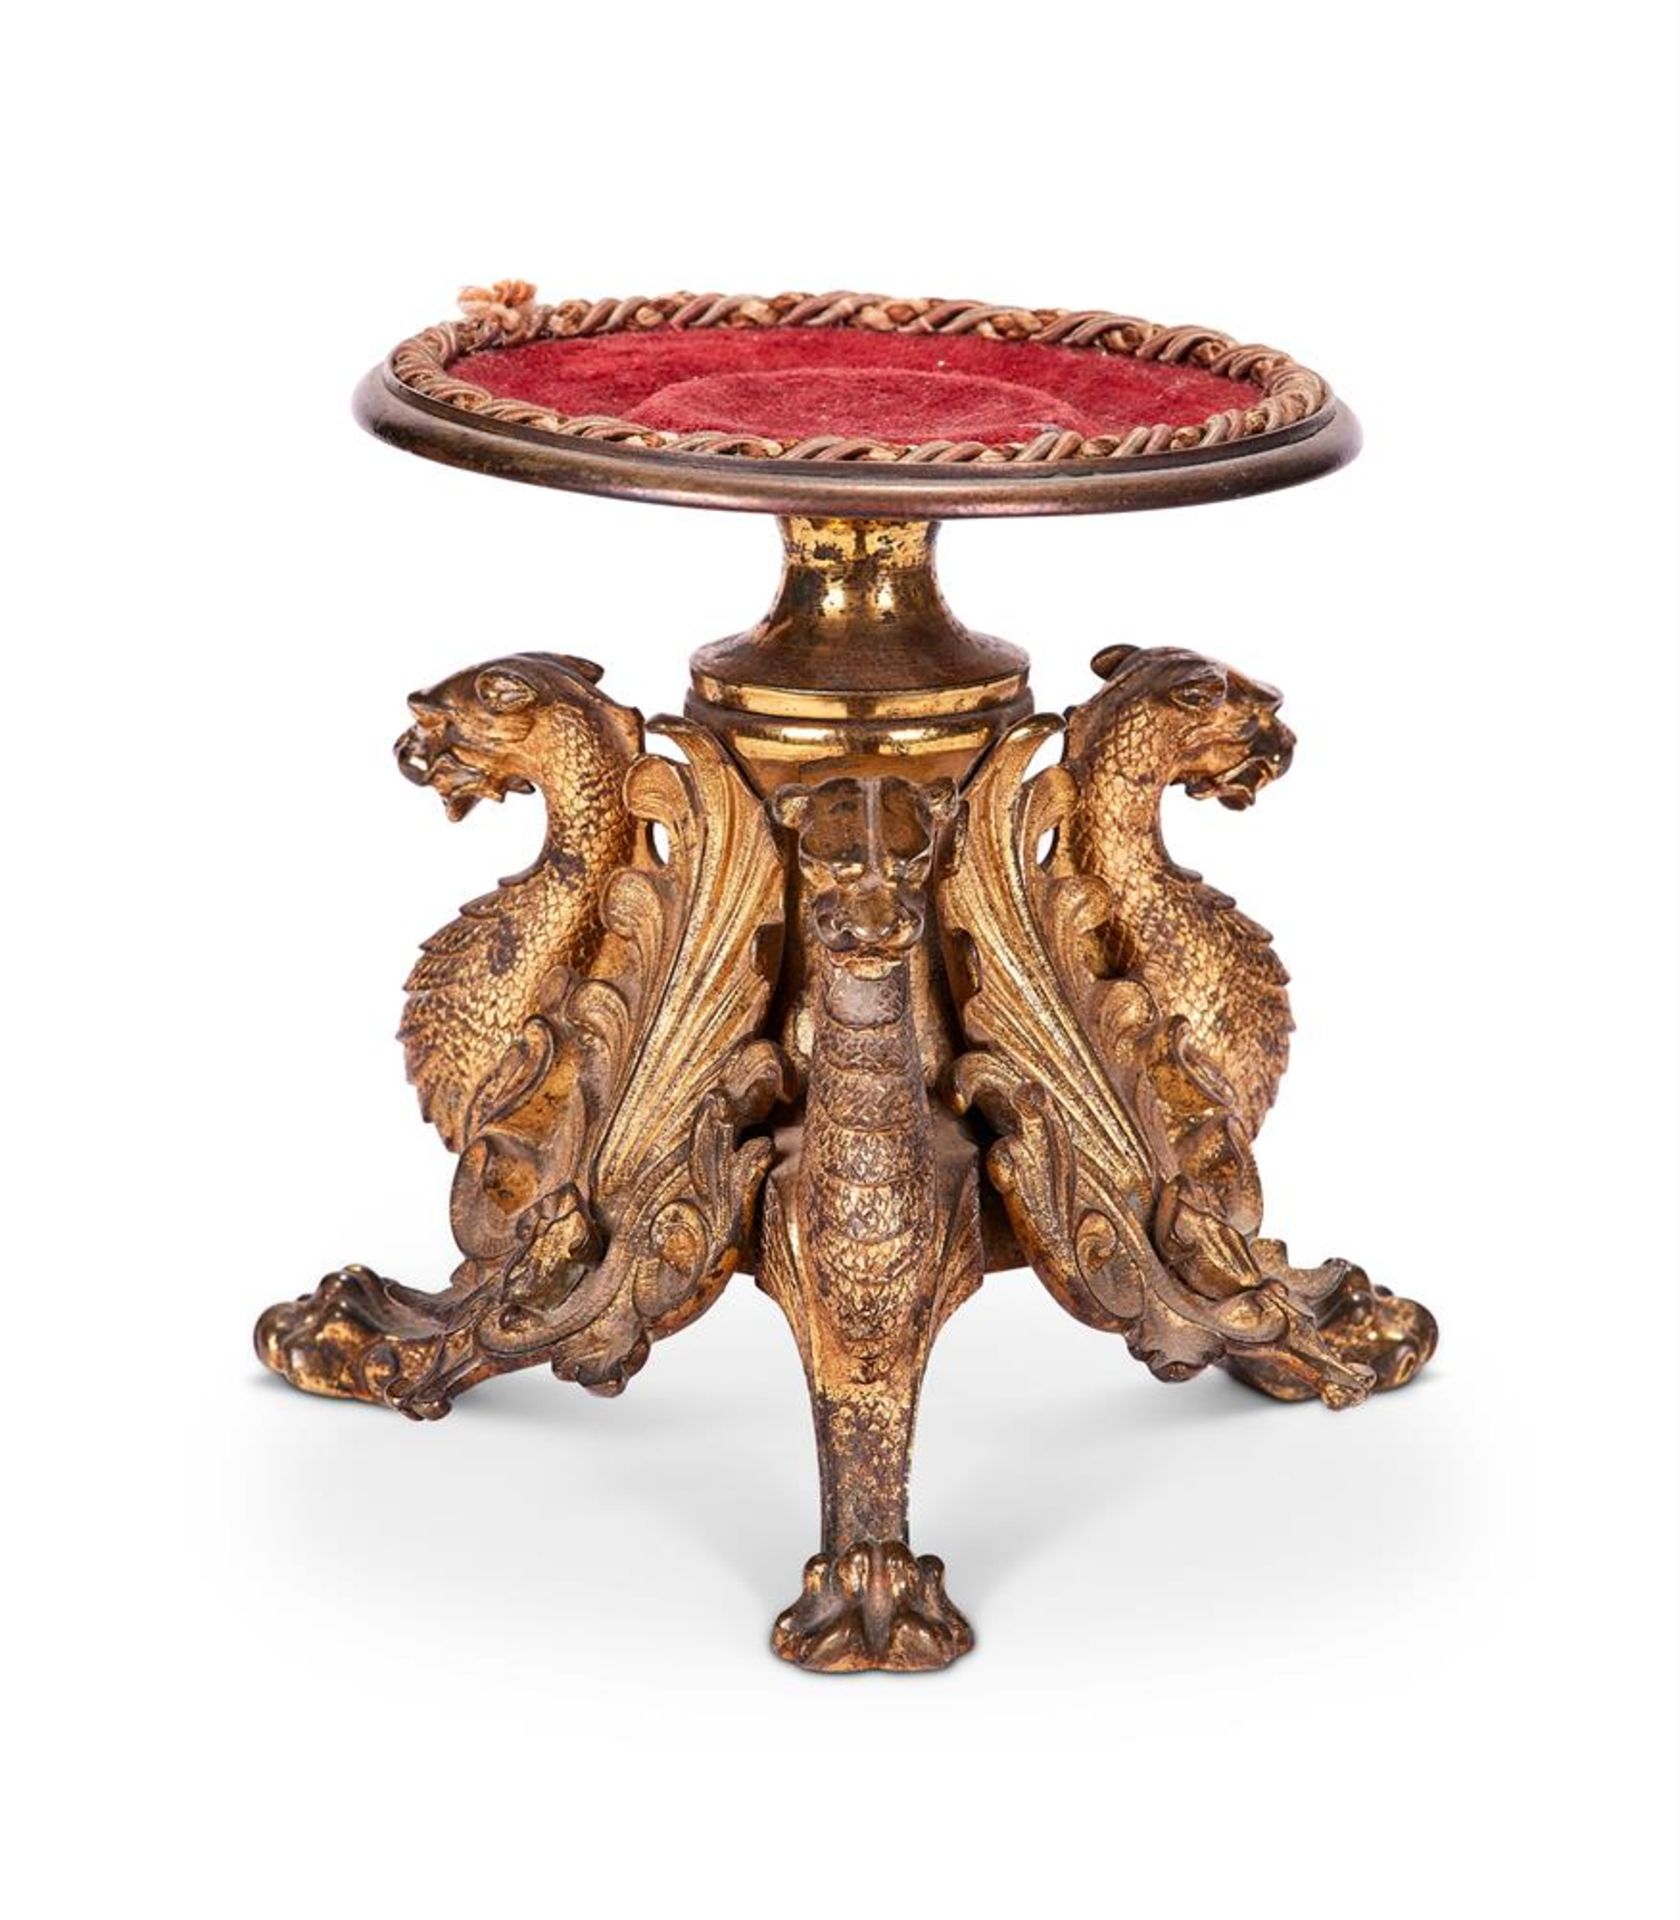 A GILT BRONZE GRIFFIN TRIPOD STAND FRENCH, LATE 19TH CENTURY